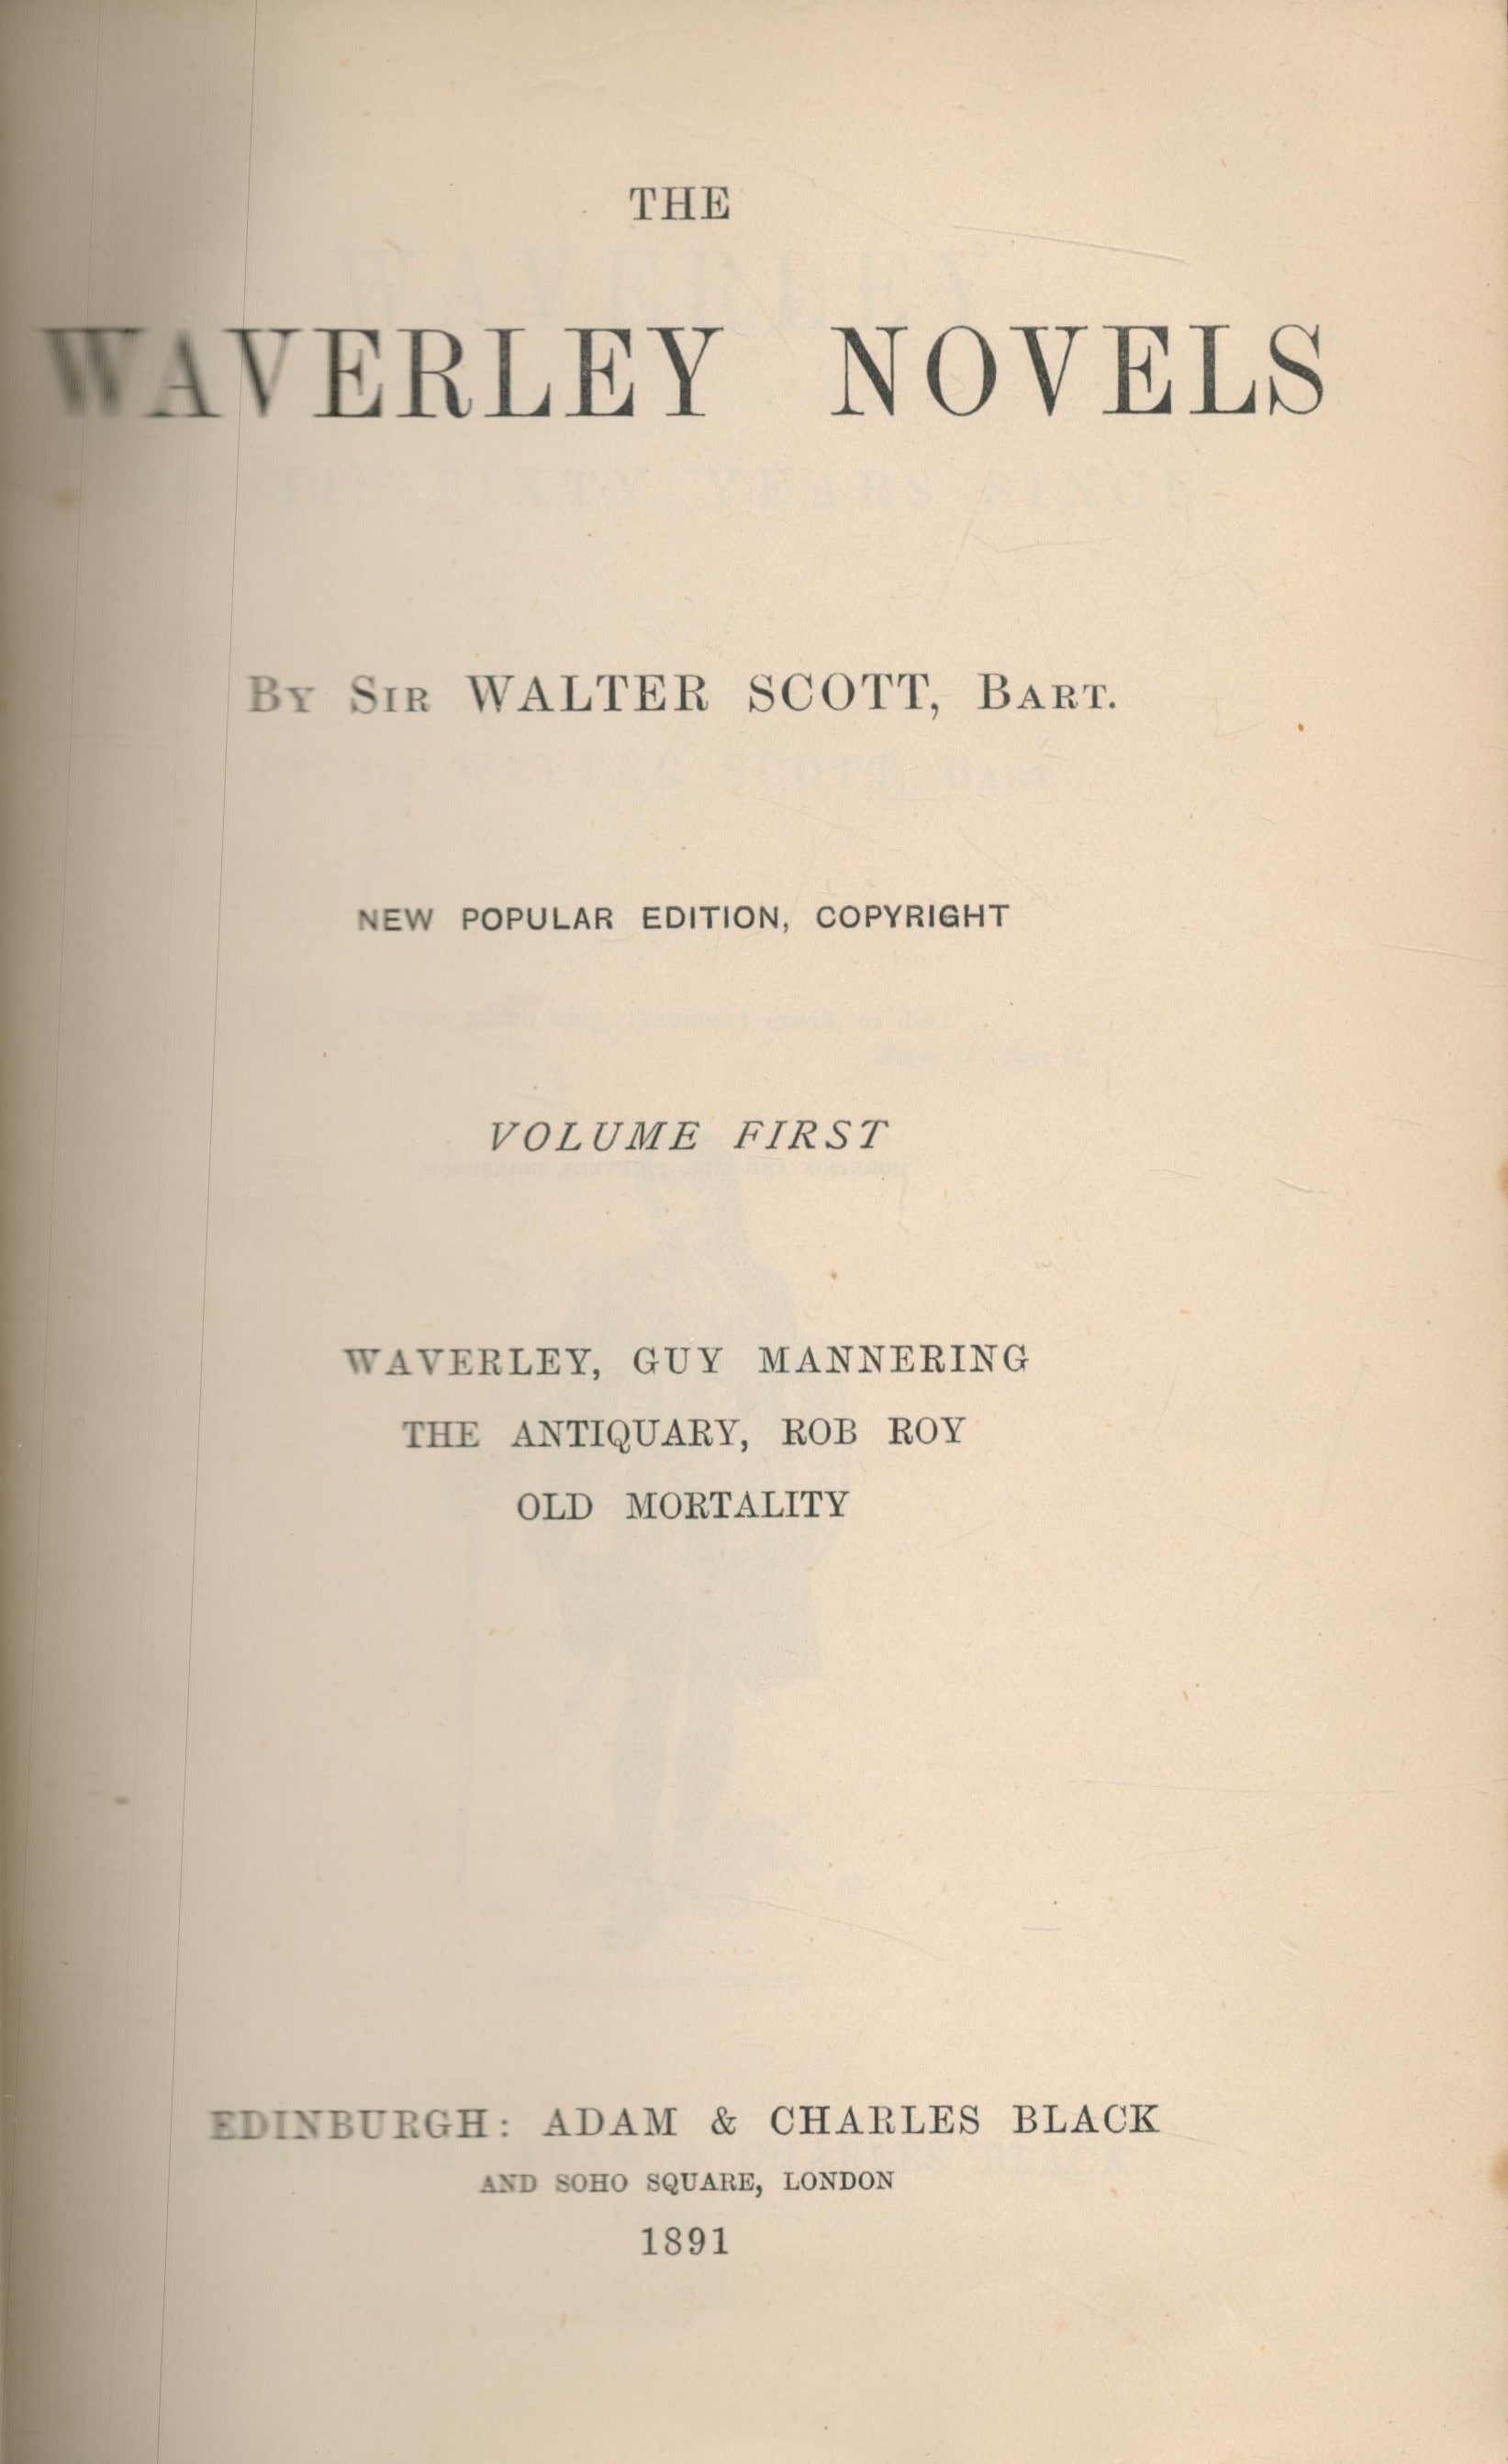 The Waverley Novels vol 1 by Sir Walter Scott 1891 New Popular Edition Hardback Book with 869 - Image 2 of 2